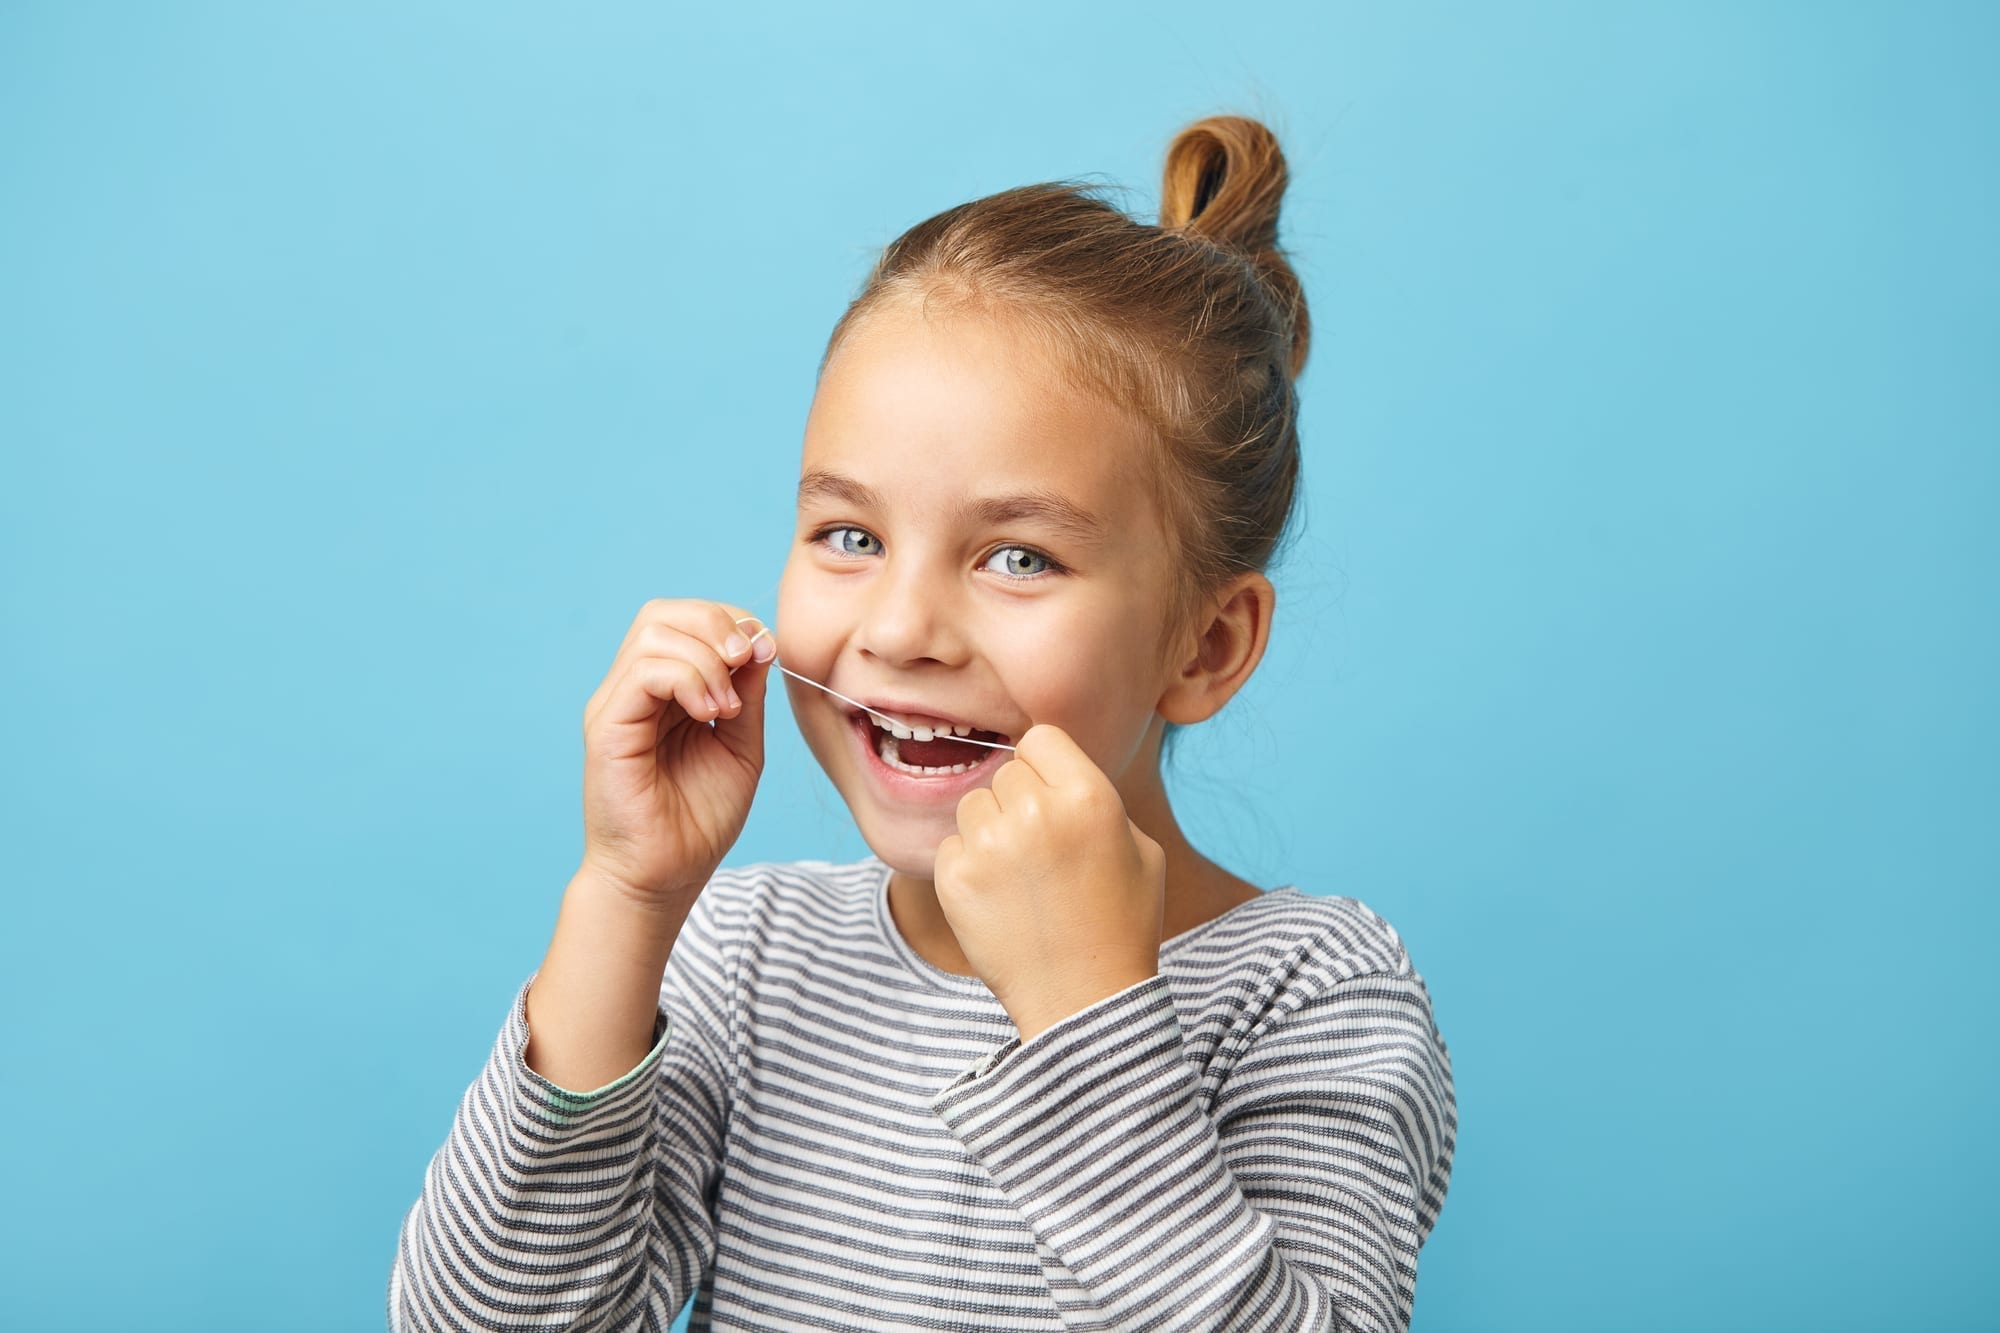 Help Your Child Achieve Optimal Oral Health With These Simple Tips